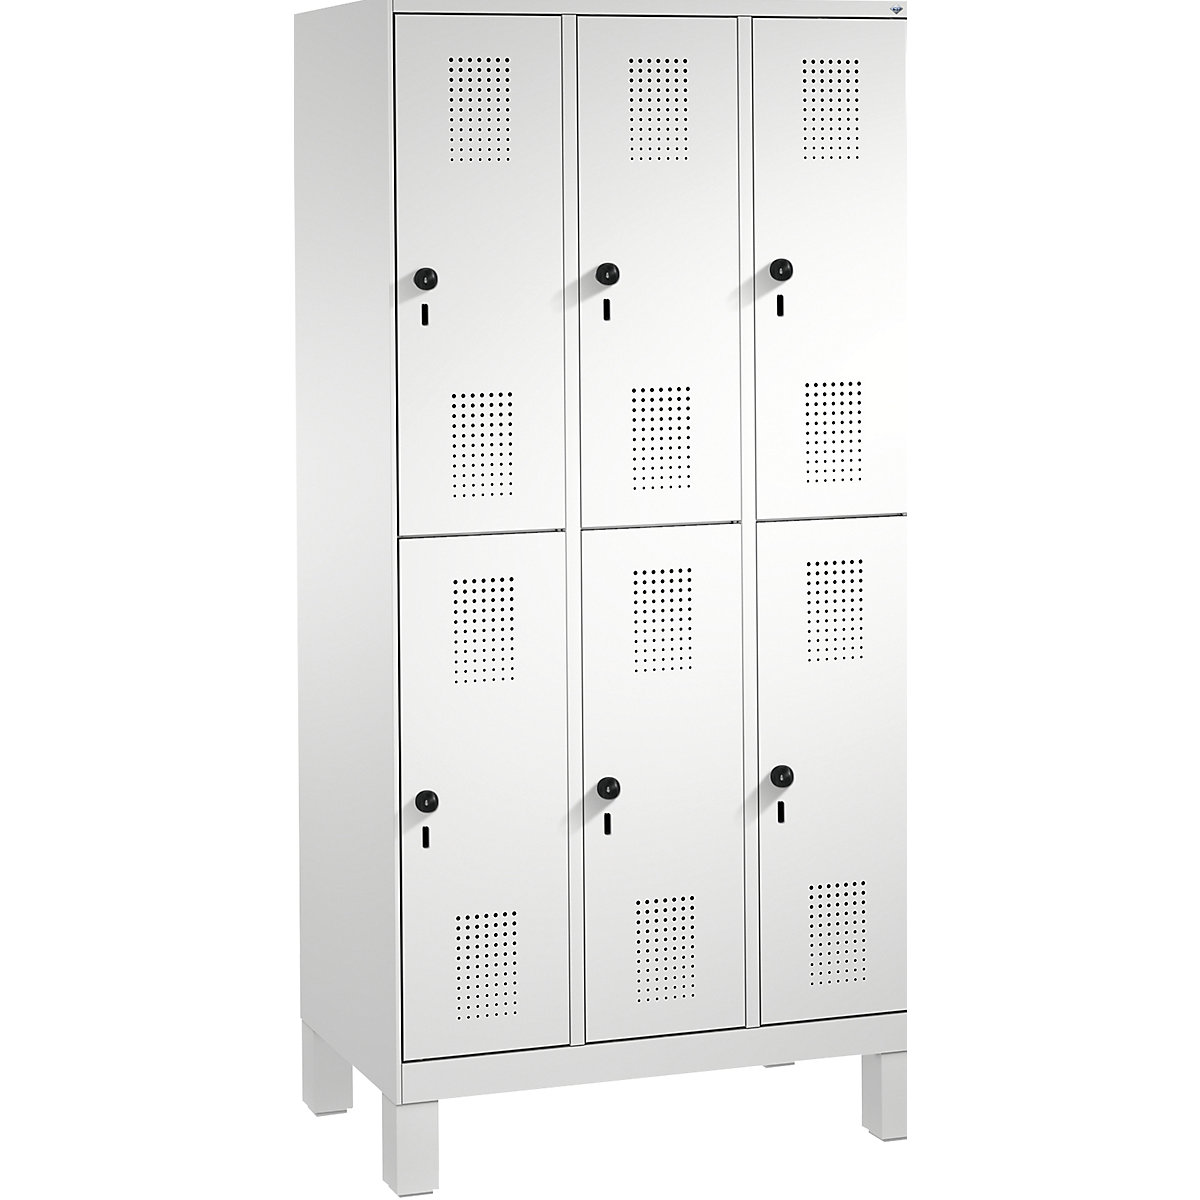 EVOLO cloakroom locker, double tier, with feet – C+P, 3 compartments, 2 shelf compartments each, compartment width 300 mm, light grey-16